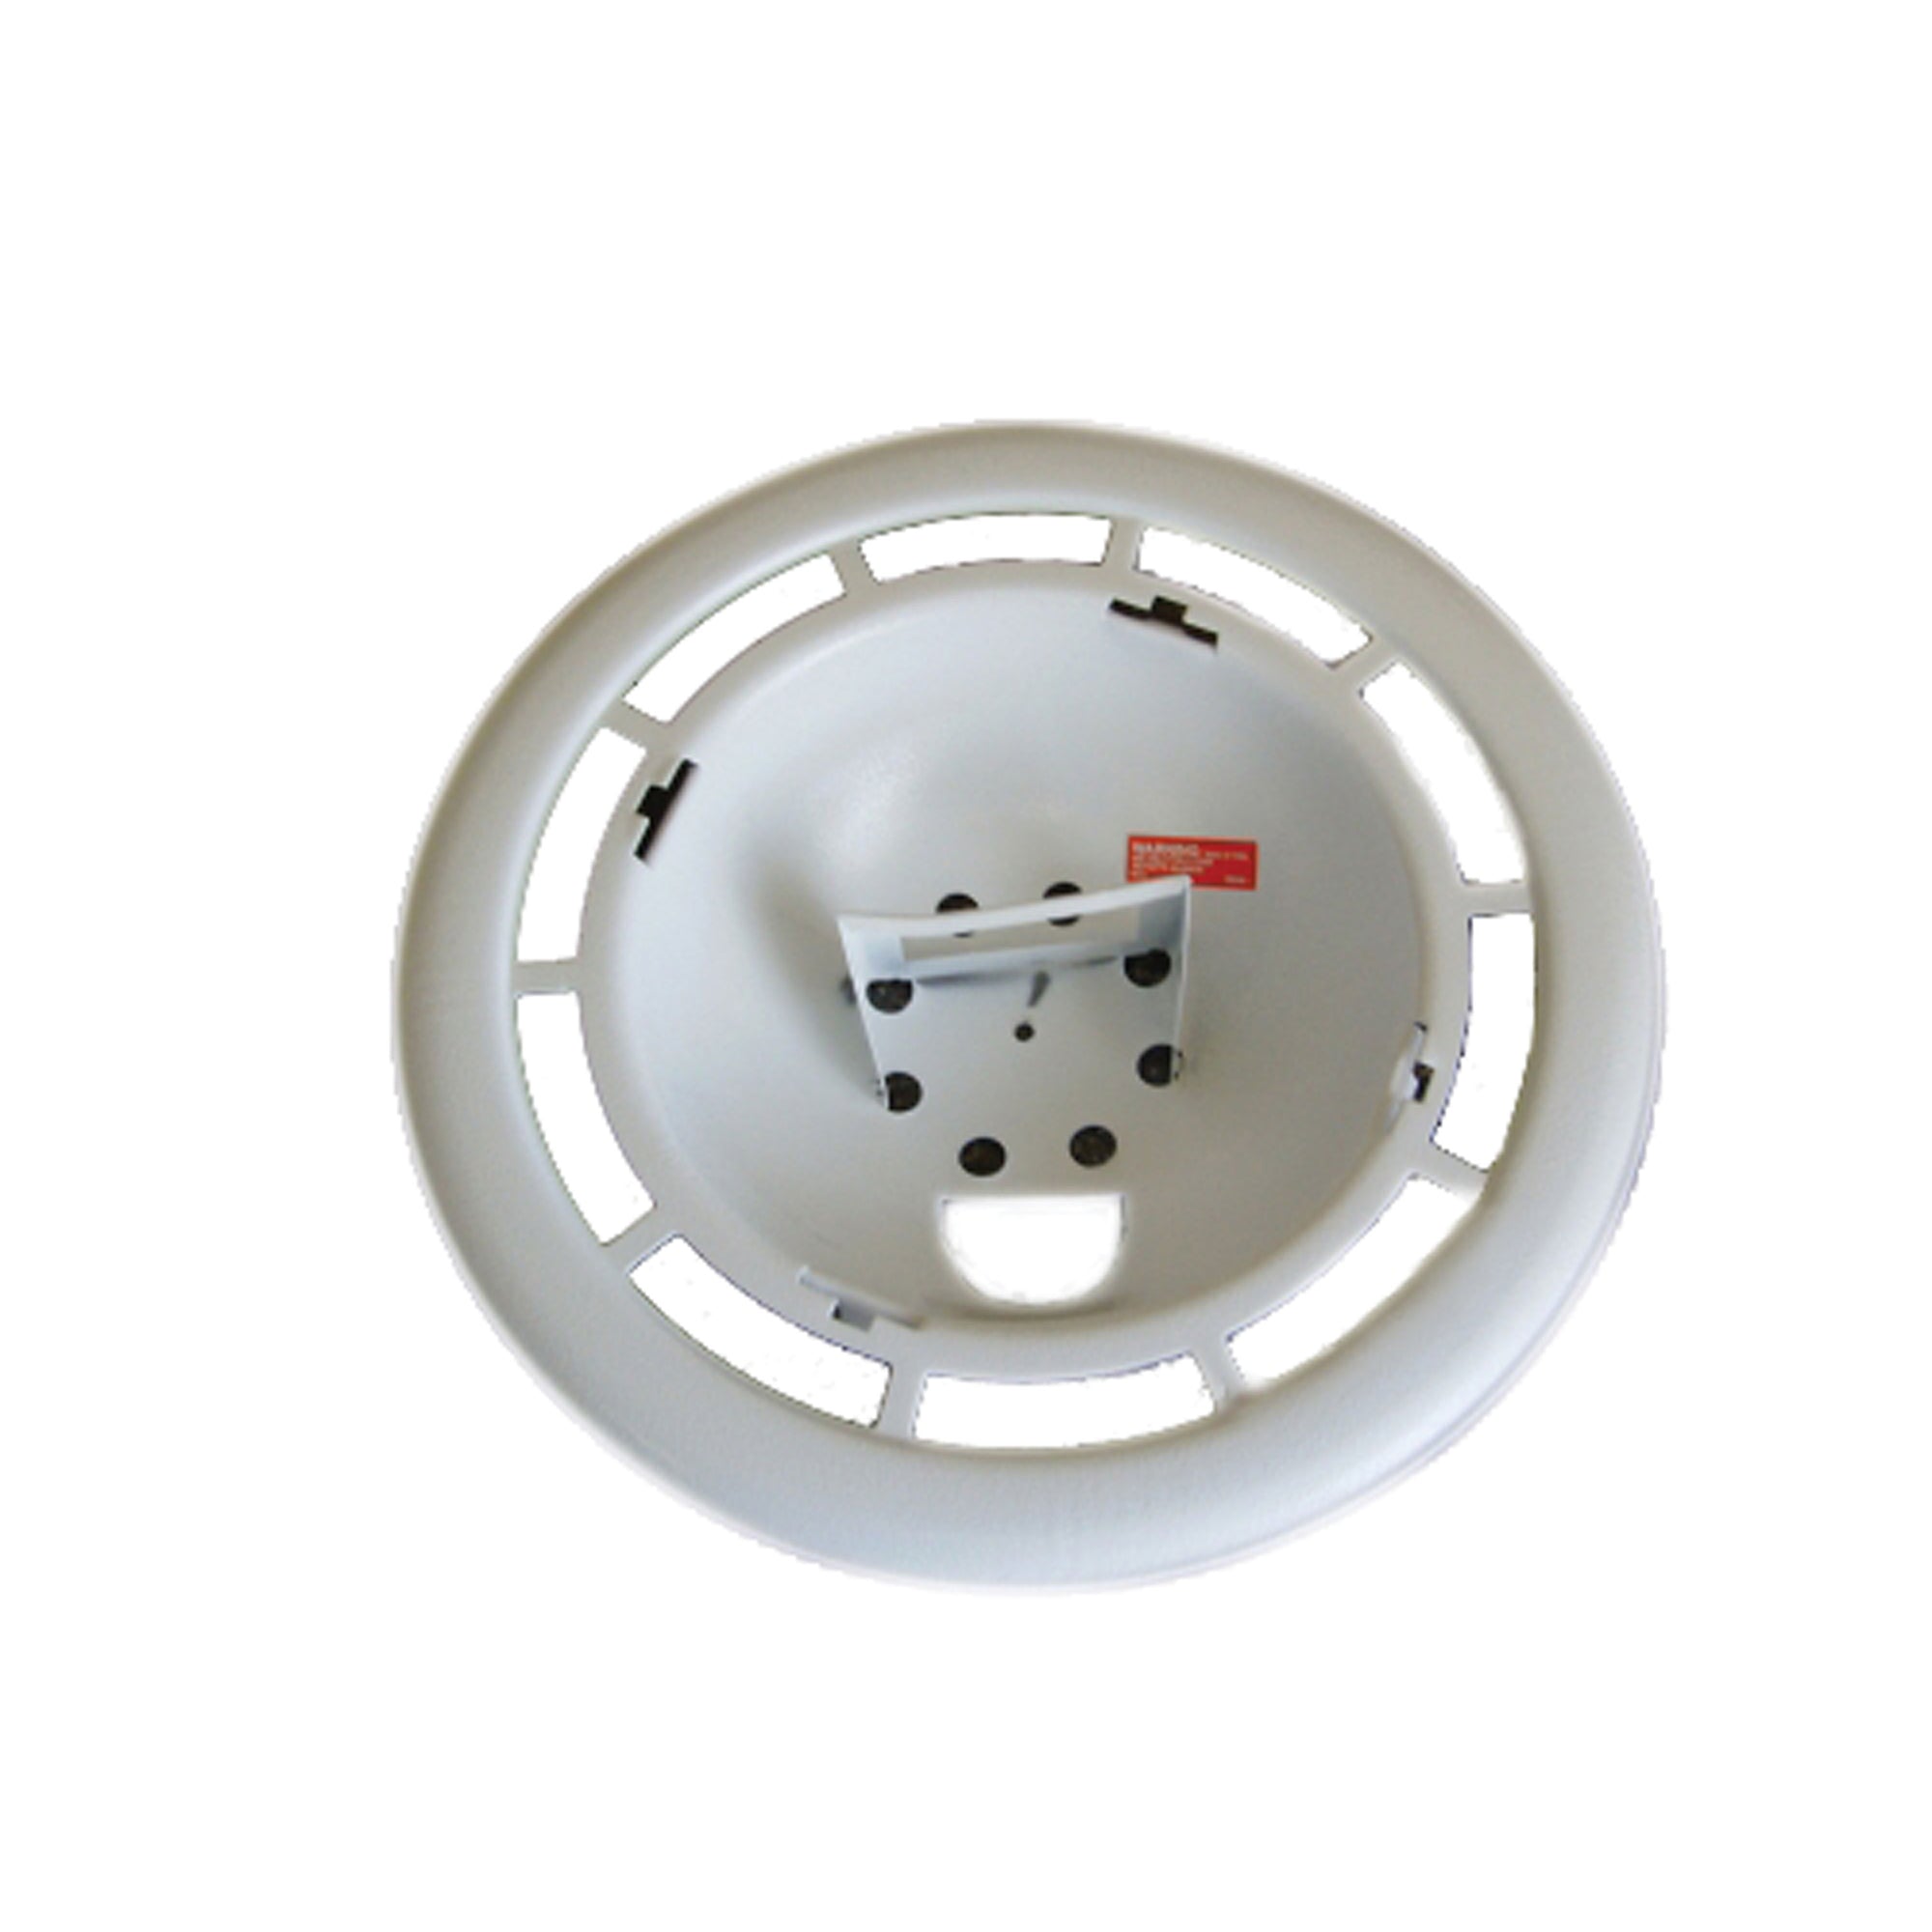 Ventline VB0505-01 Ceiling Fan With Light Replacement Parts - White Grill Flange Assembly